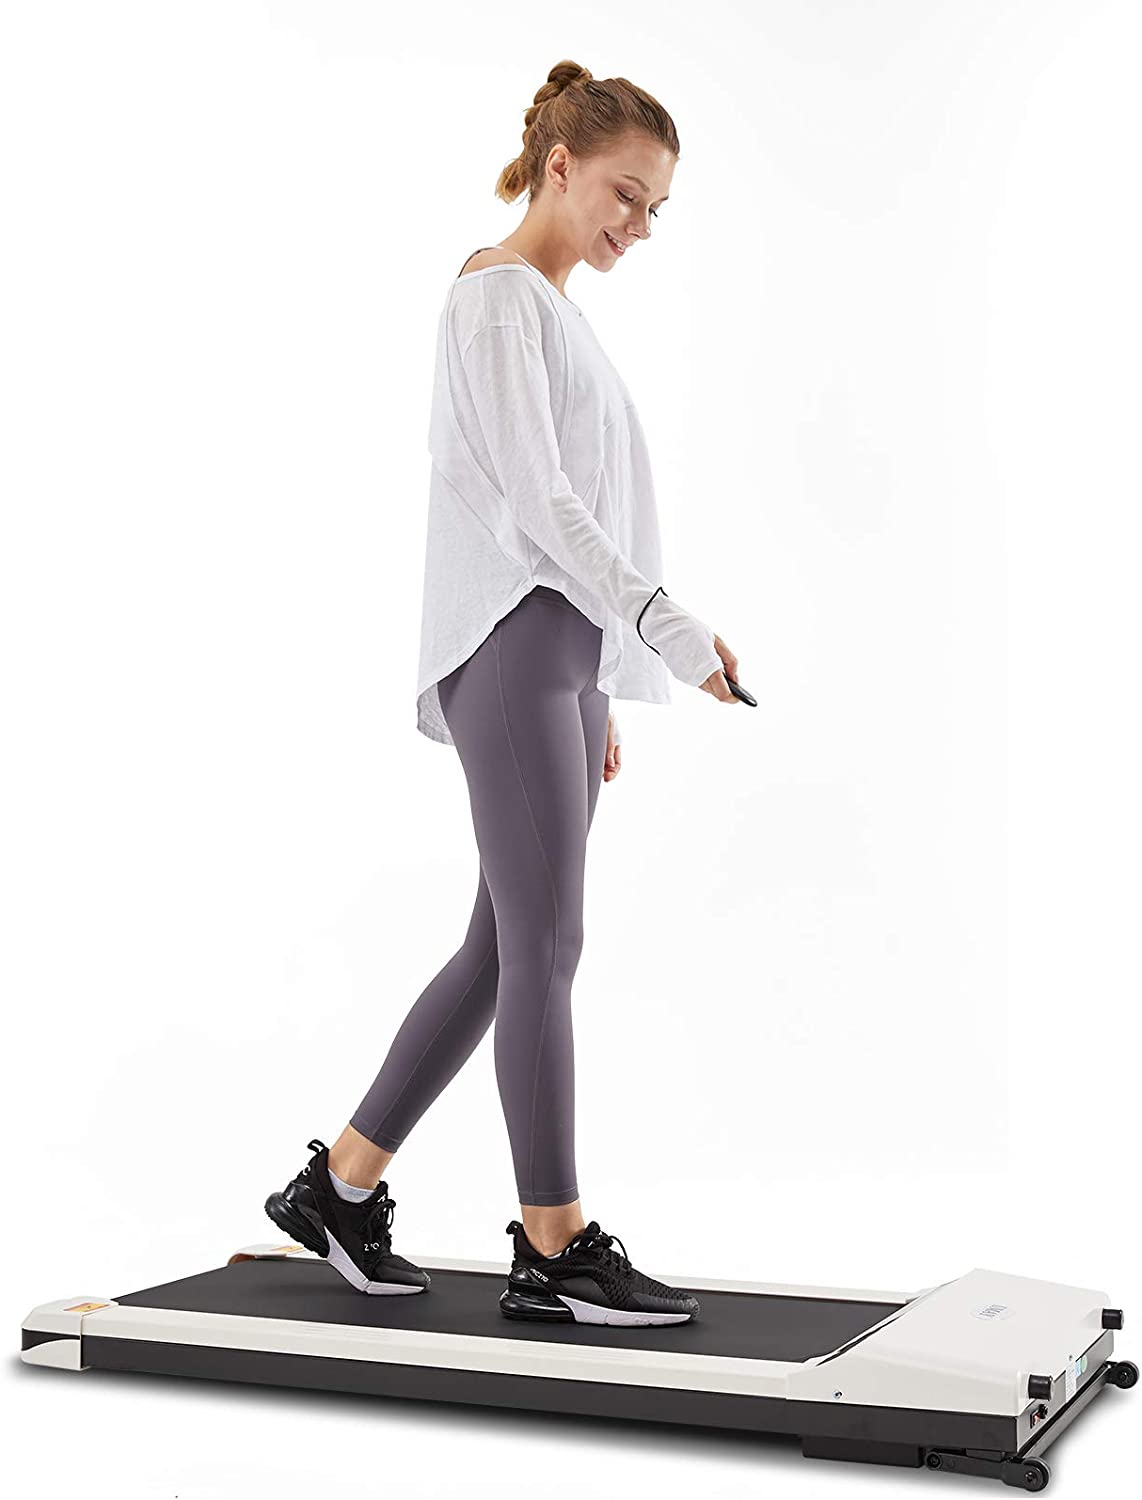 UMAY Walking Pad 512, Under Desk Treadmill with Incline - $210